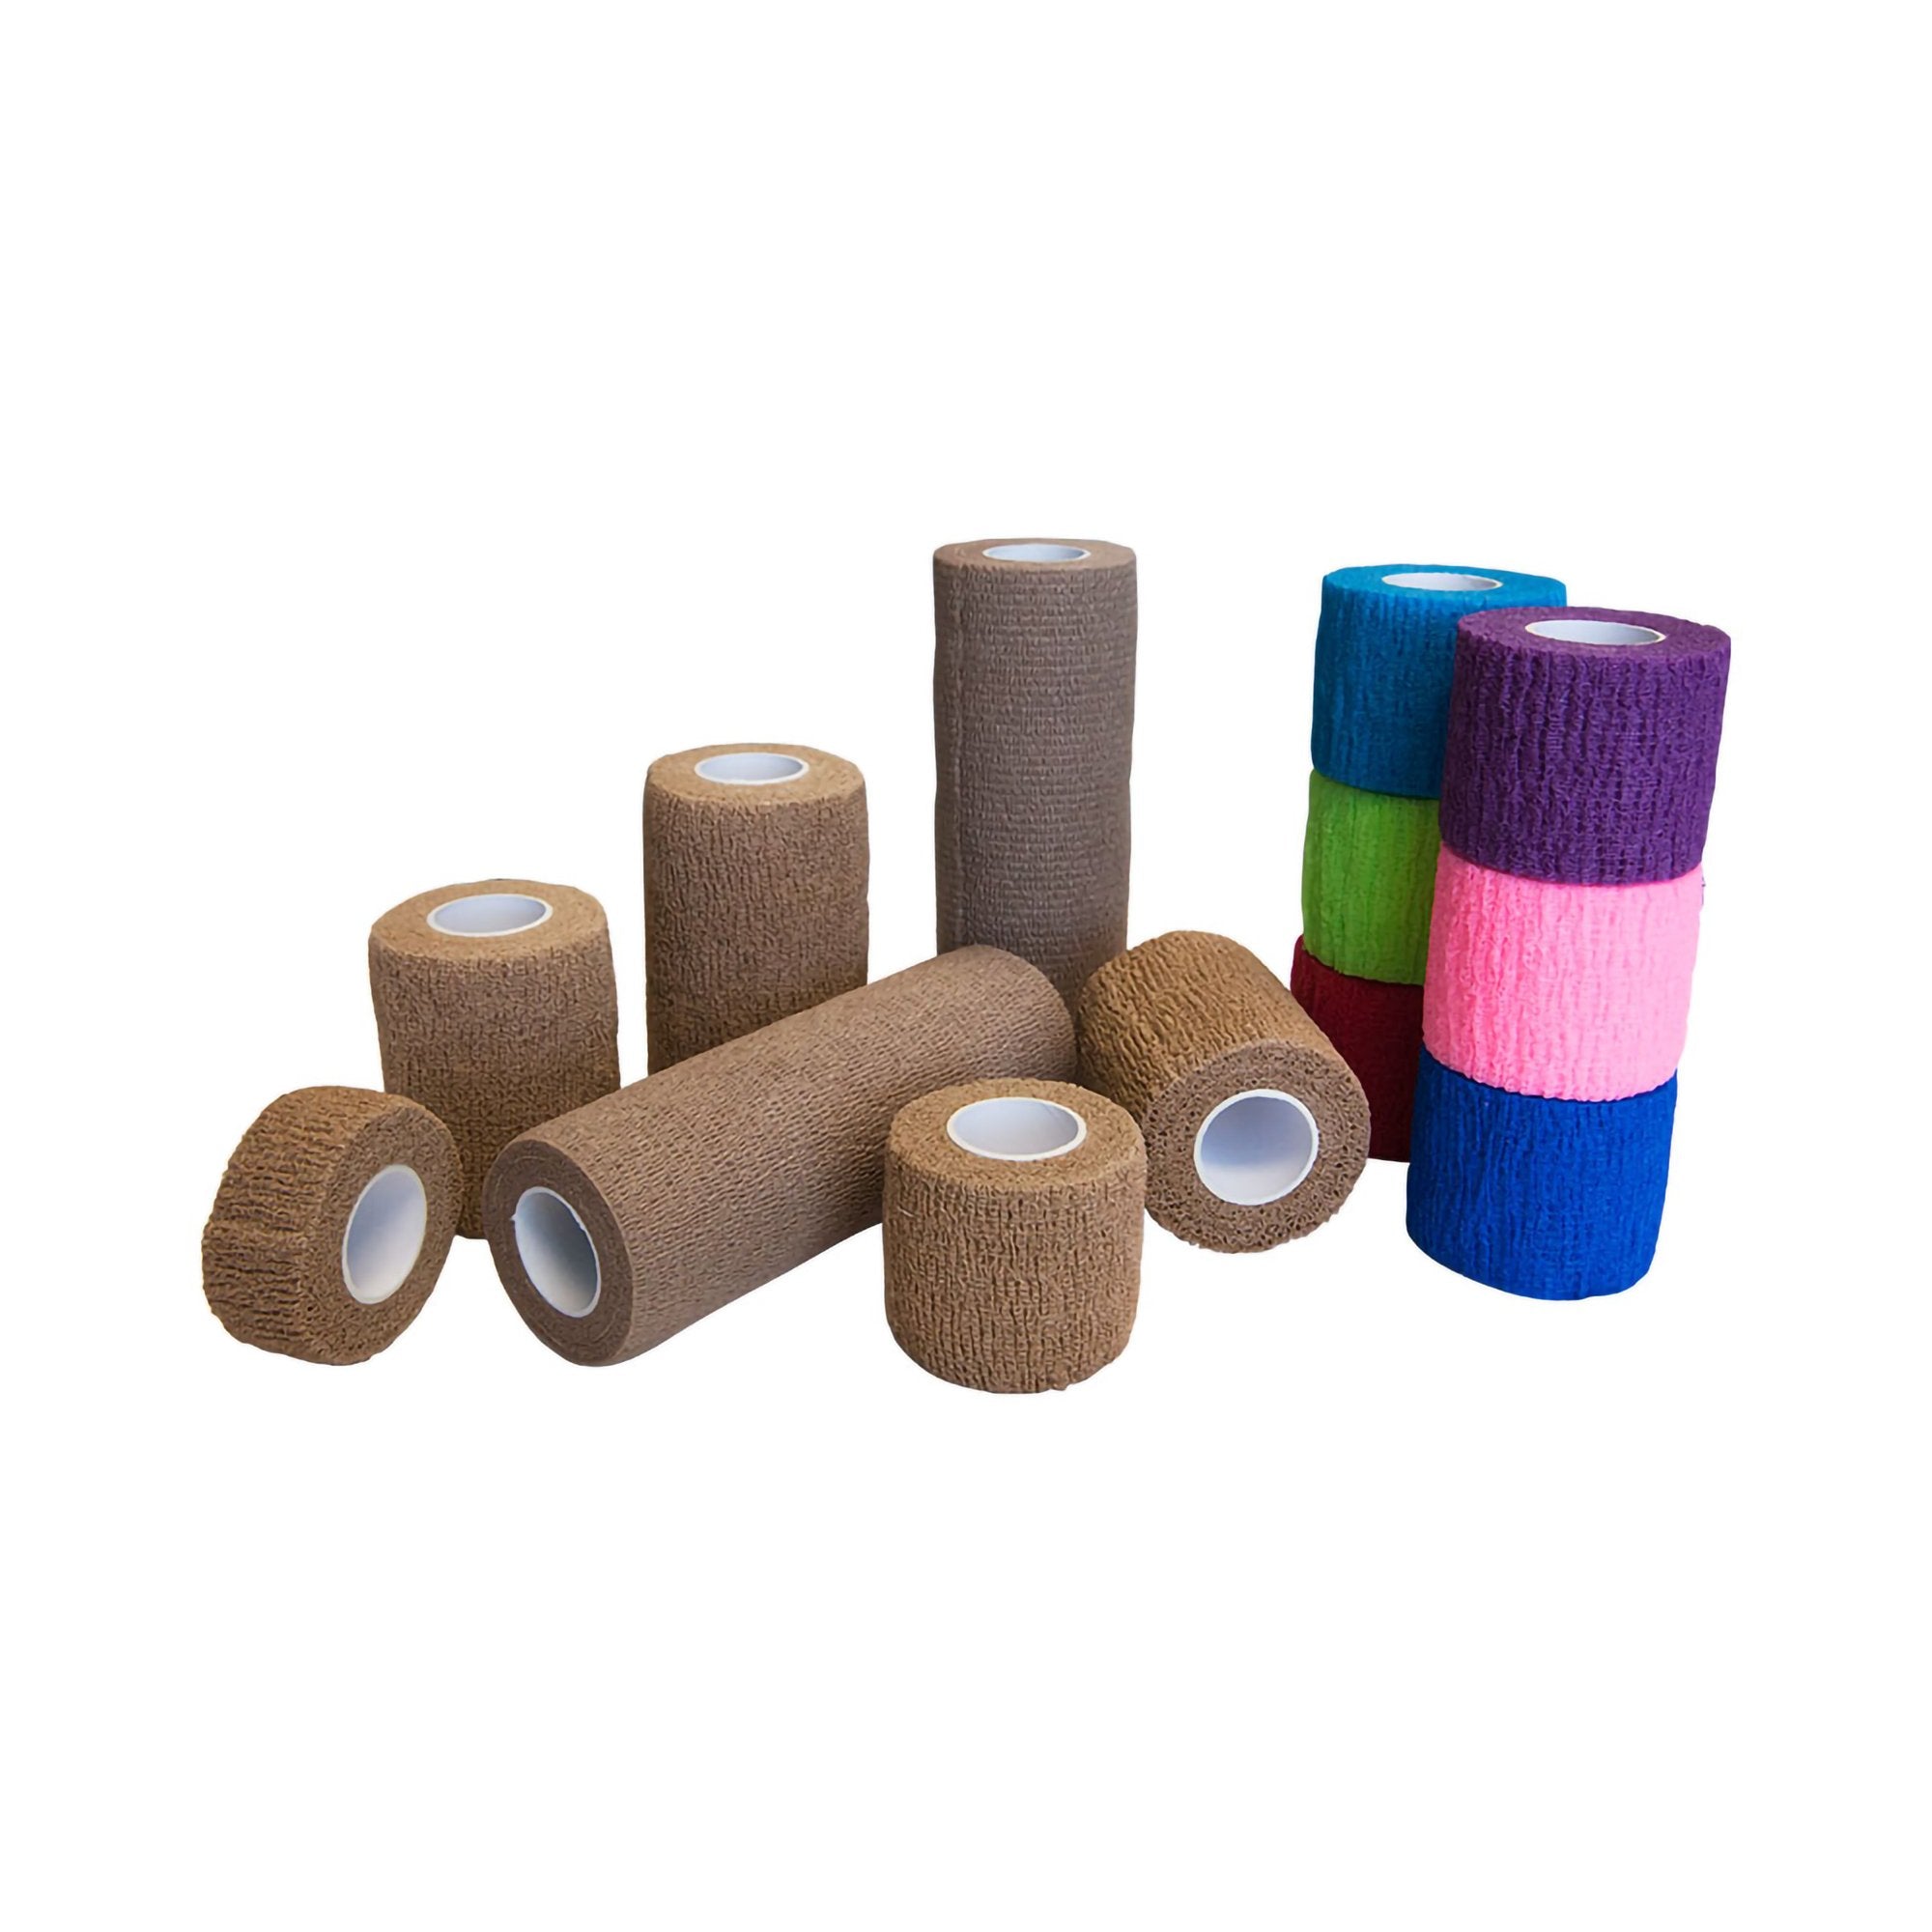 Cohesive Bandage Premier Pro™ 2 Inch X 5 Yard Self-Adherent Closure Assorted Colors NonSterile Standard Compression